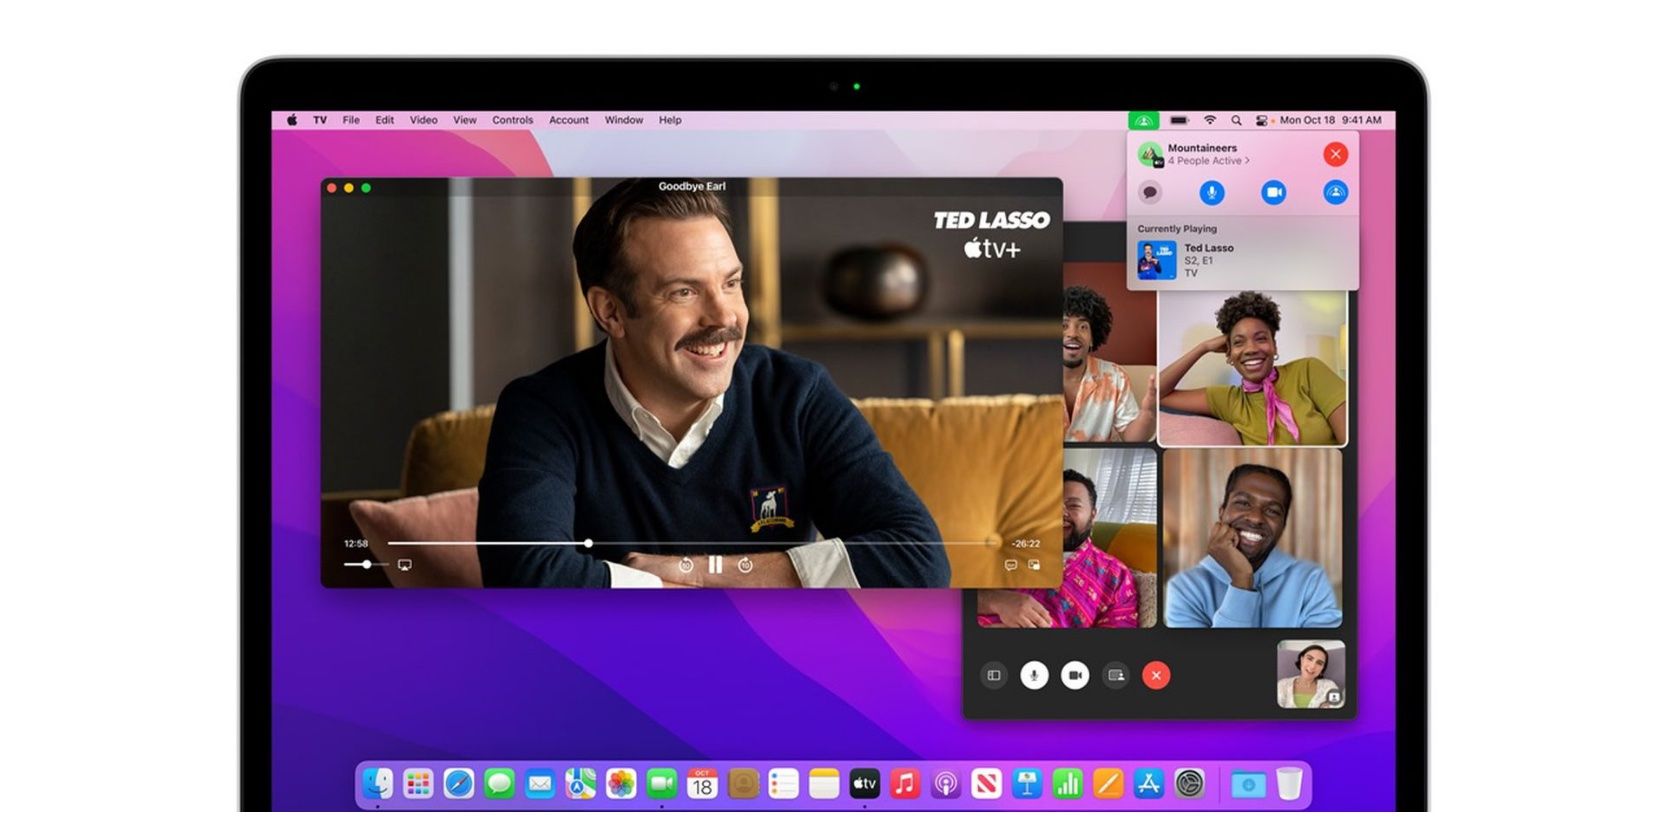 8 Tips to Fix SharePlay Not Working in FaceTime on Mac